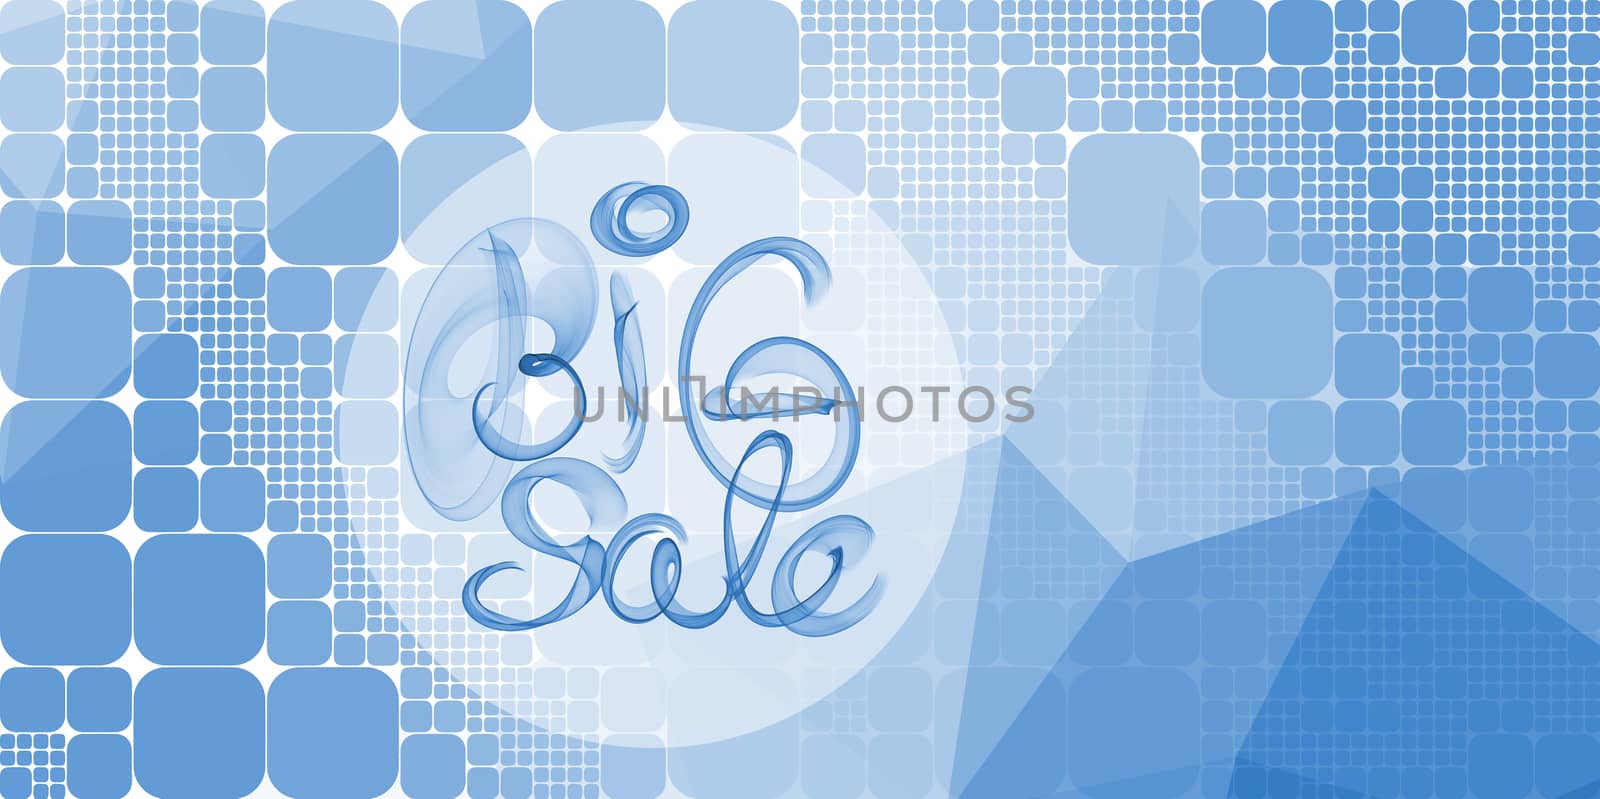 Big sale banner lettering written with blue smoke or flame on geometric square and round abstract background by skrotov